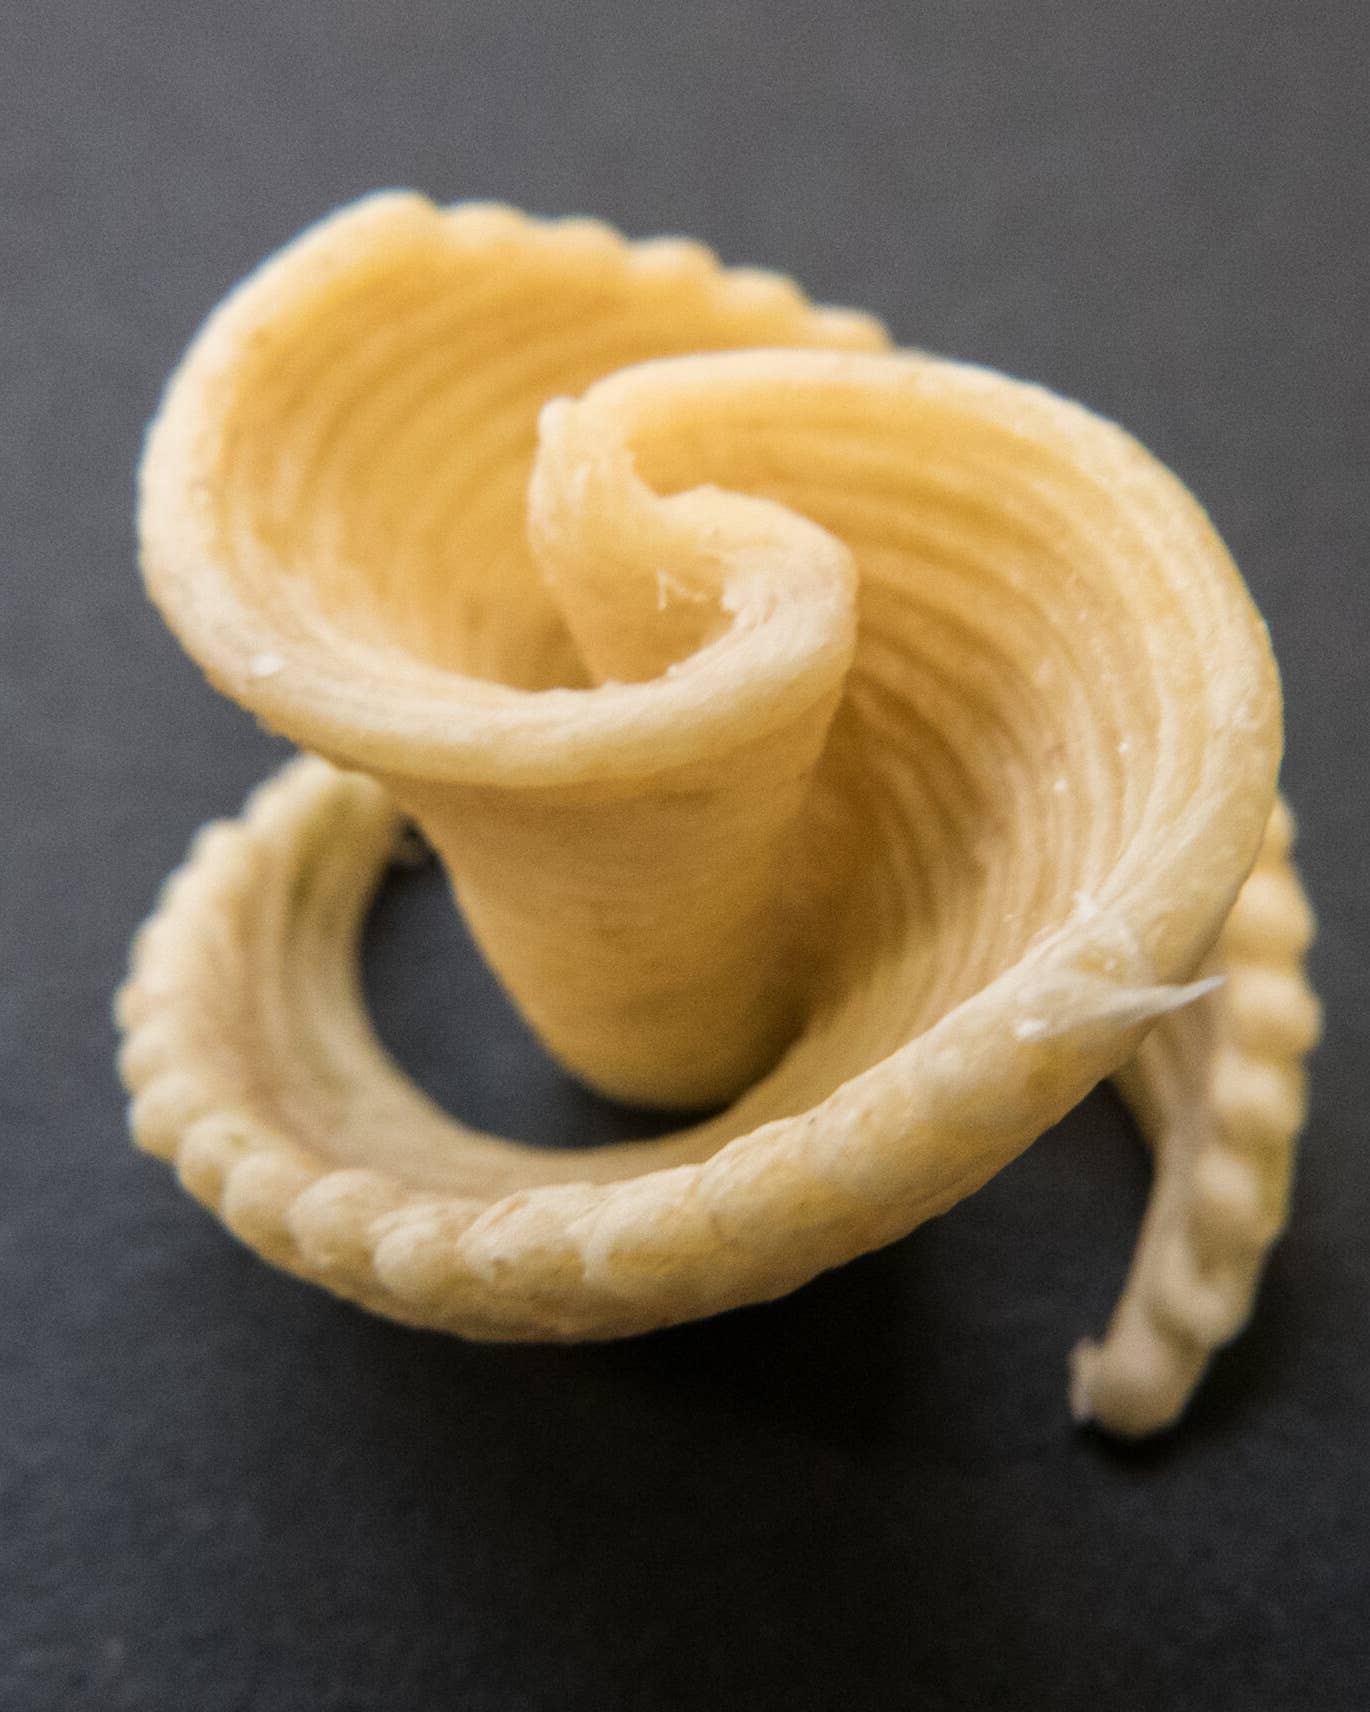 3D Printers Make Incredible Pastas Your Nonna Could Only Dream About